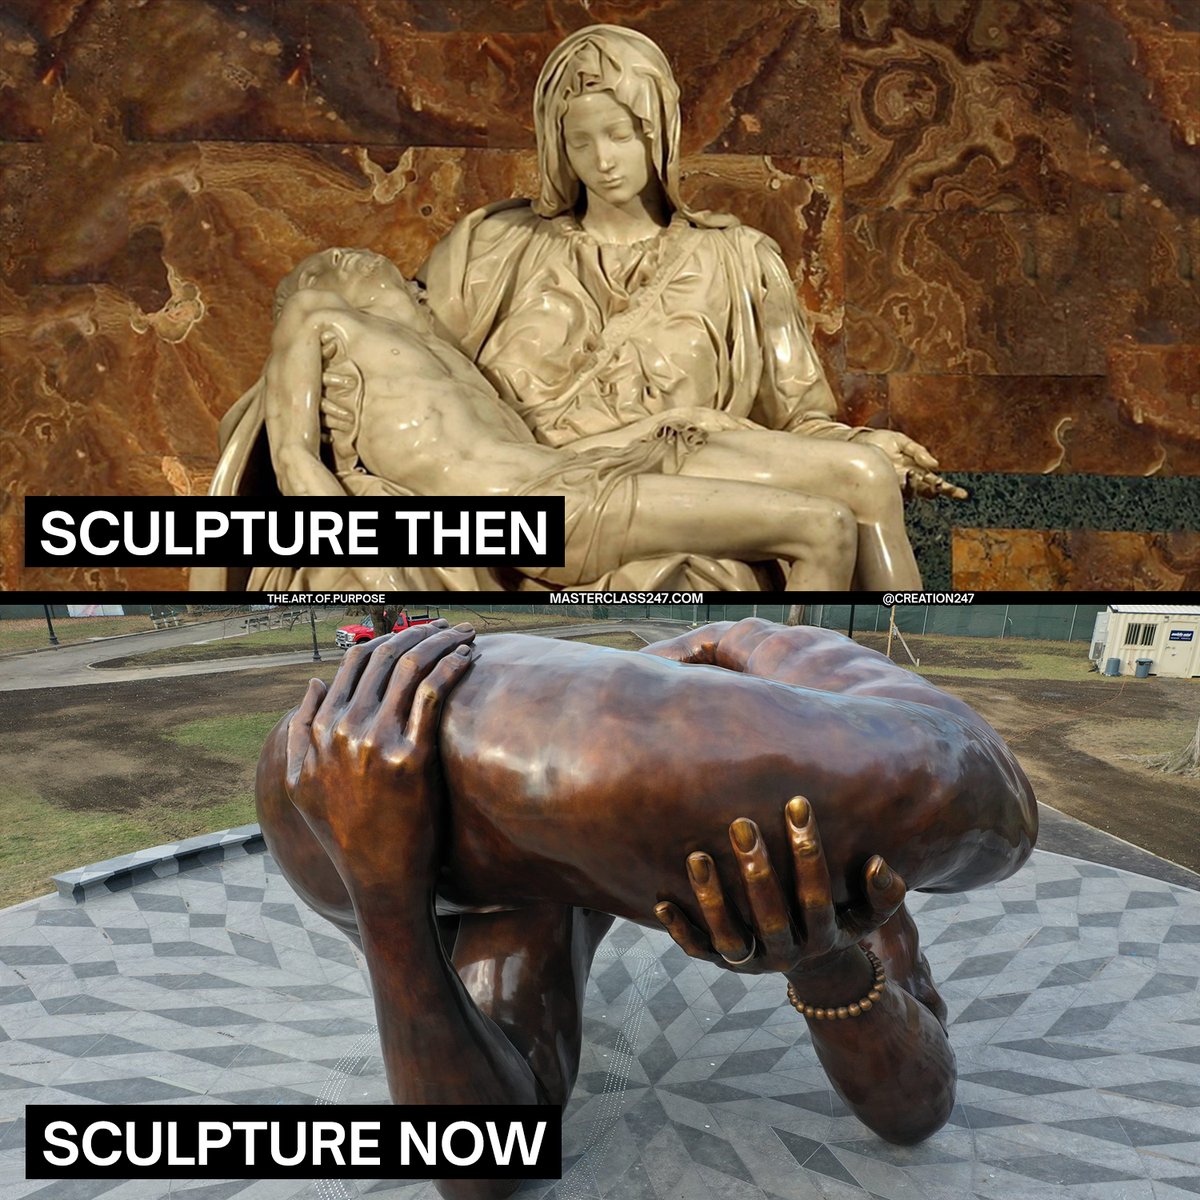 This is a reminder that we used to build sculptures that looked like this... but why did we stop?